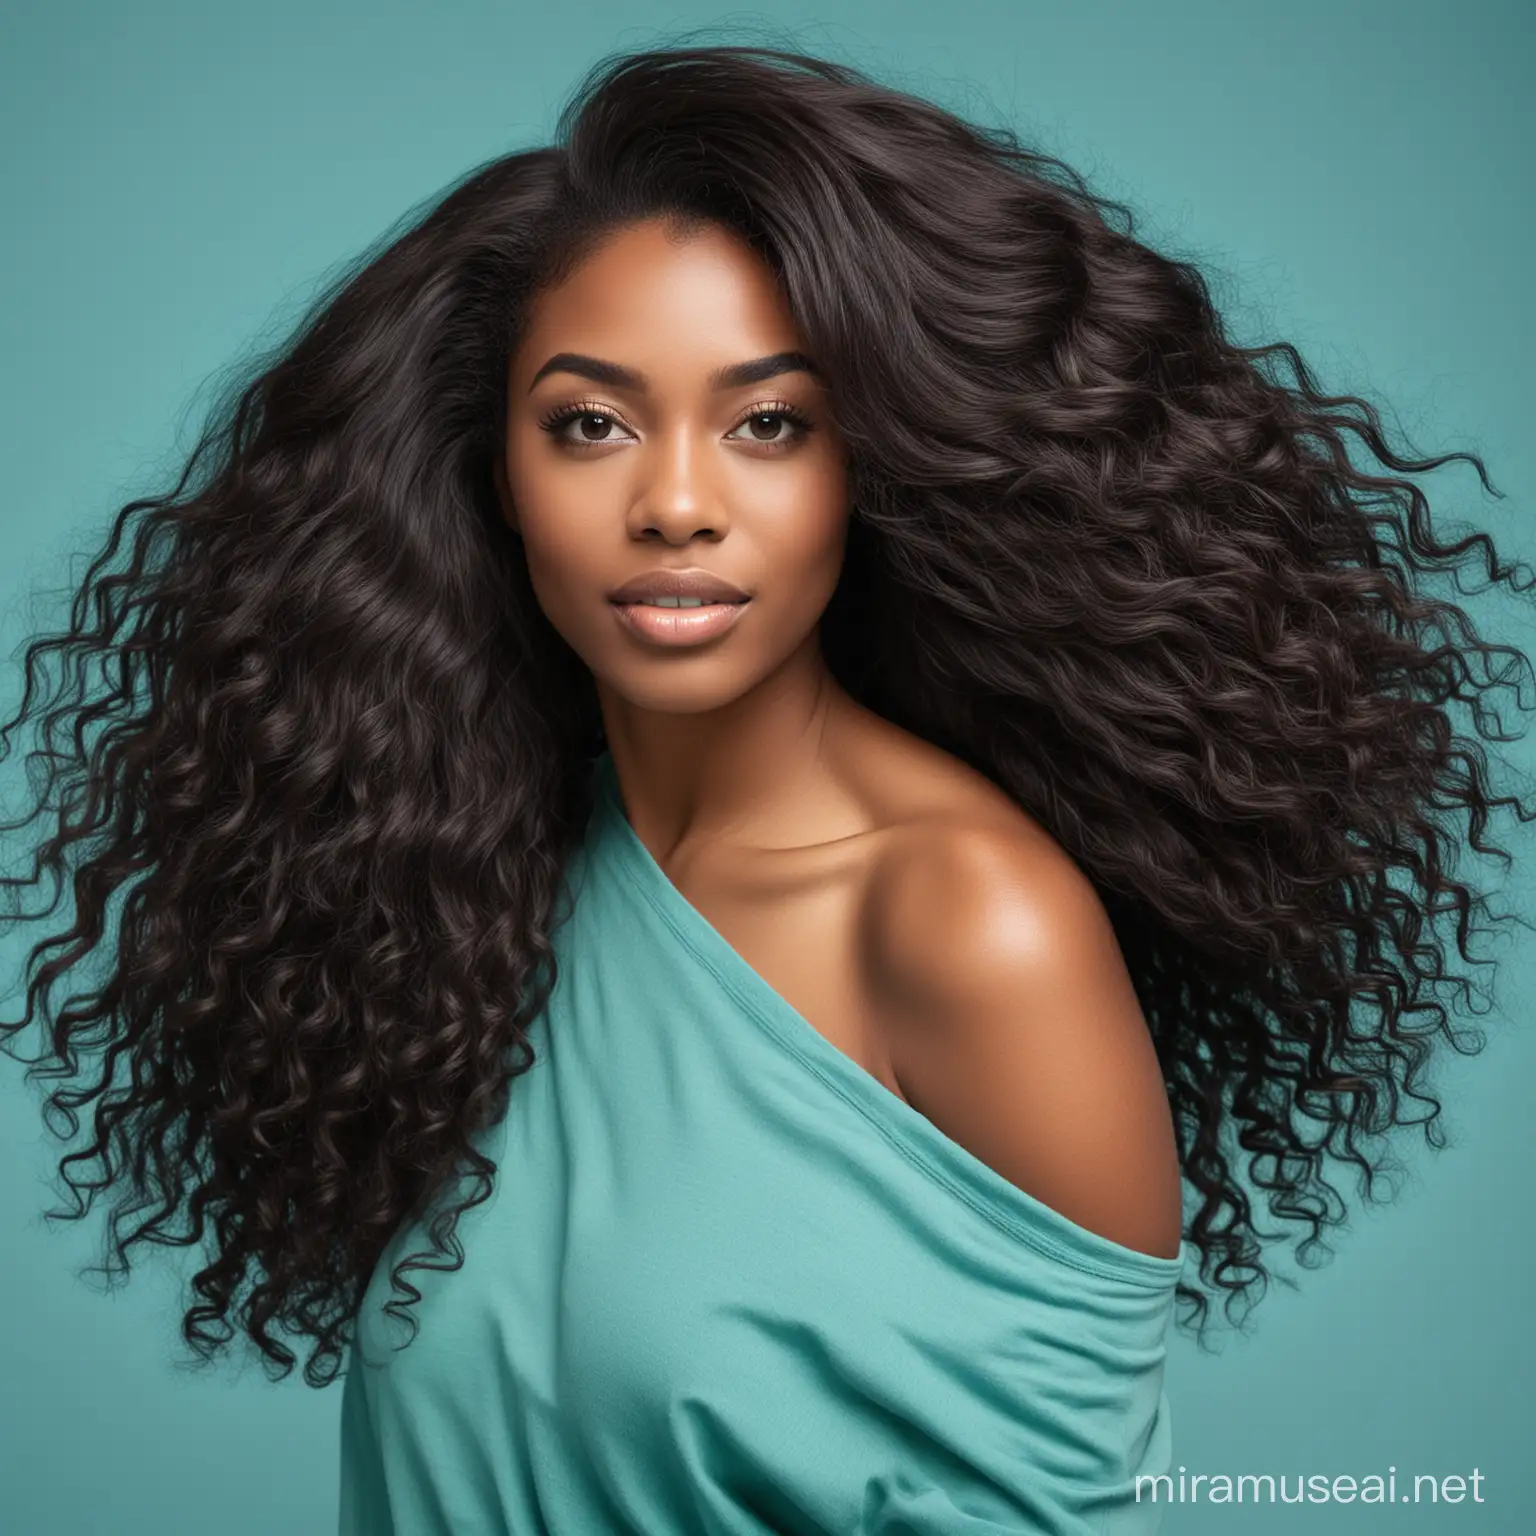 Stunning Black Woman with Lustrous Bouncy Hair on Vibrant Teal Background